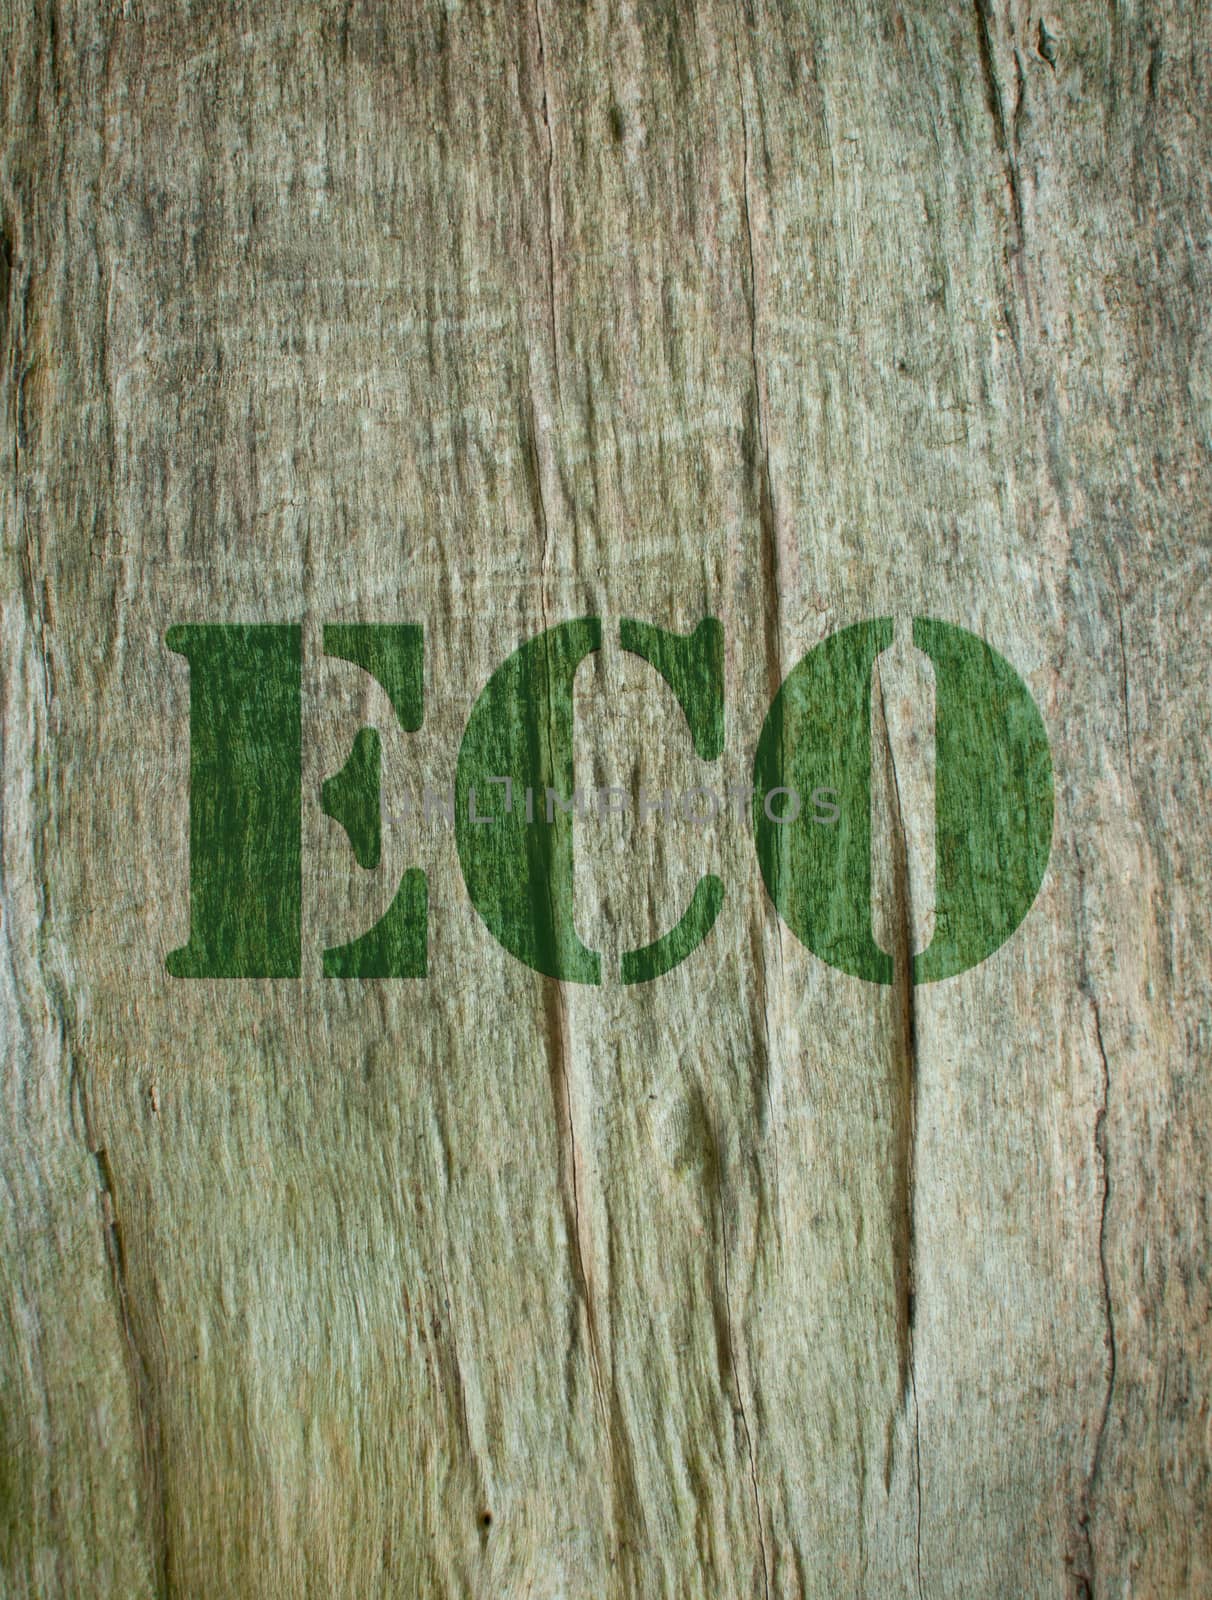 The word eco etched into the bark of a tree 